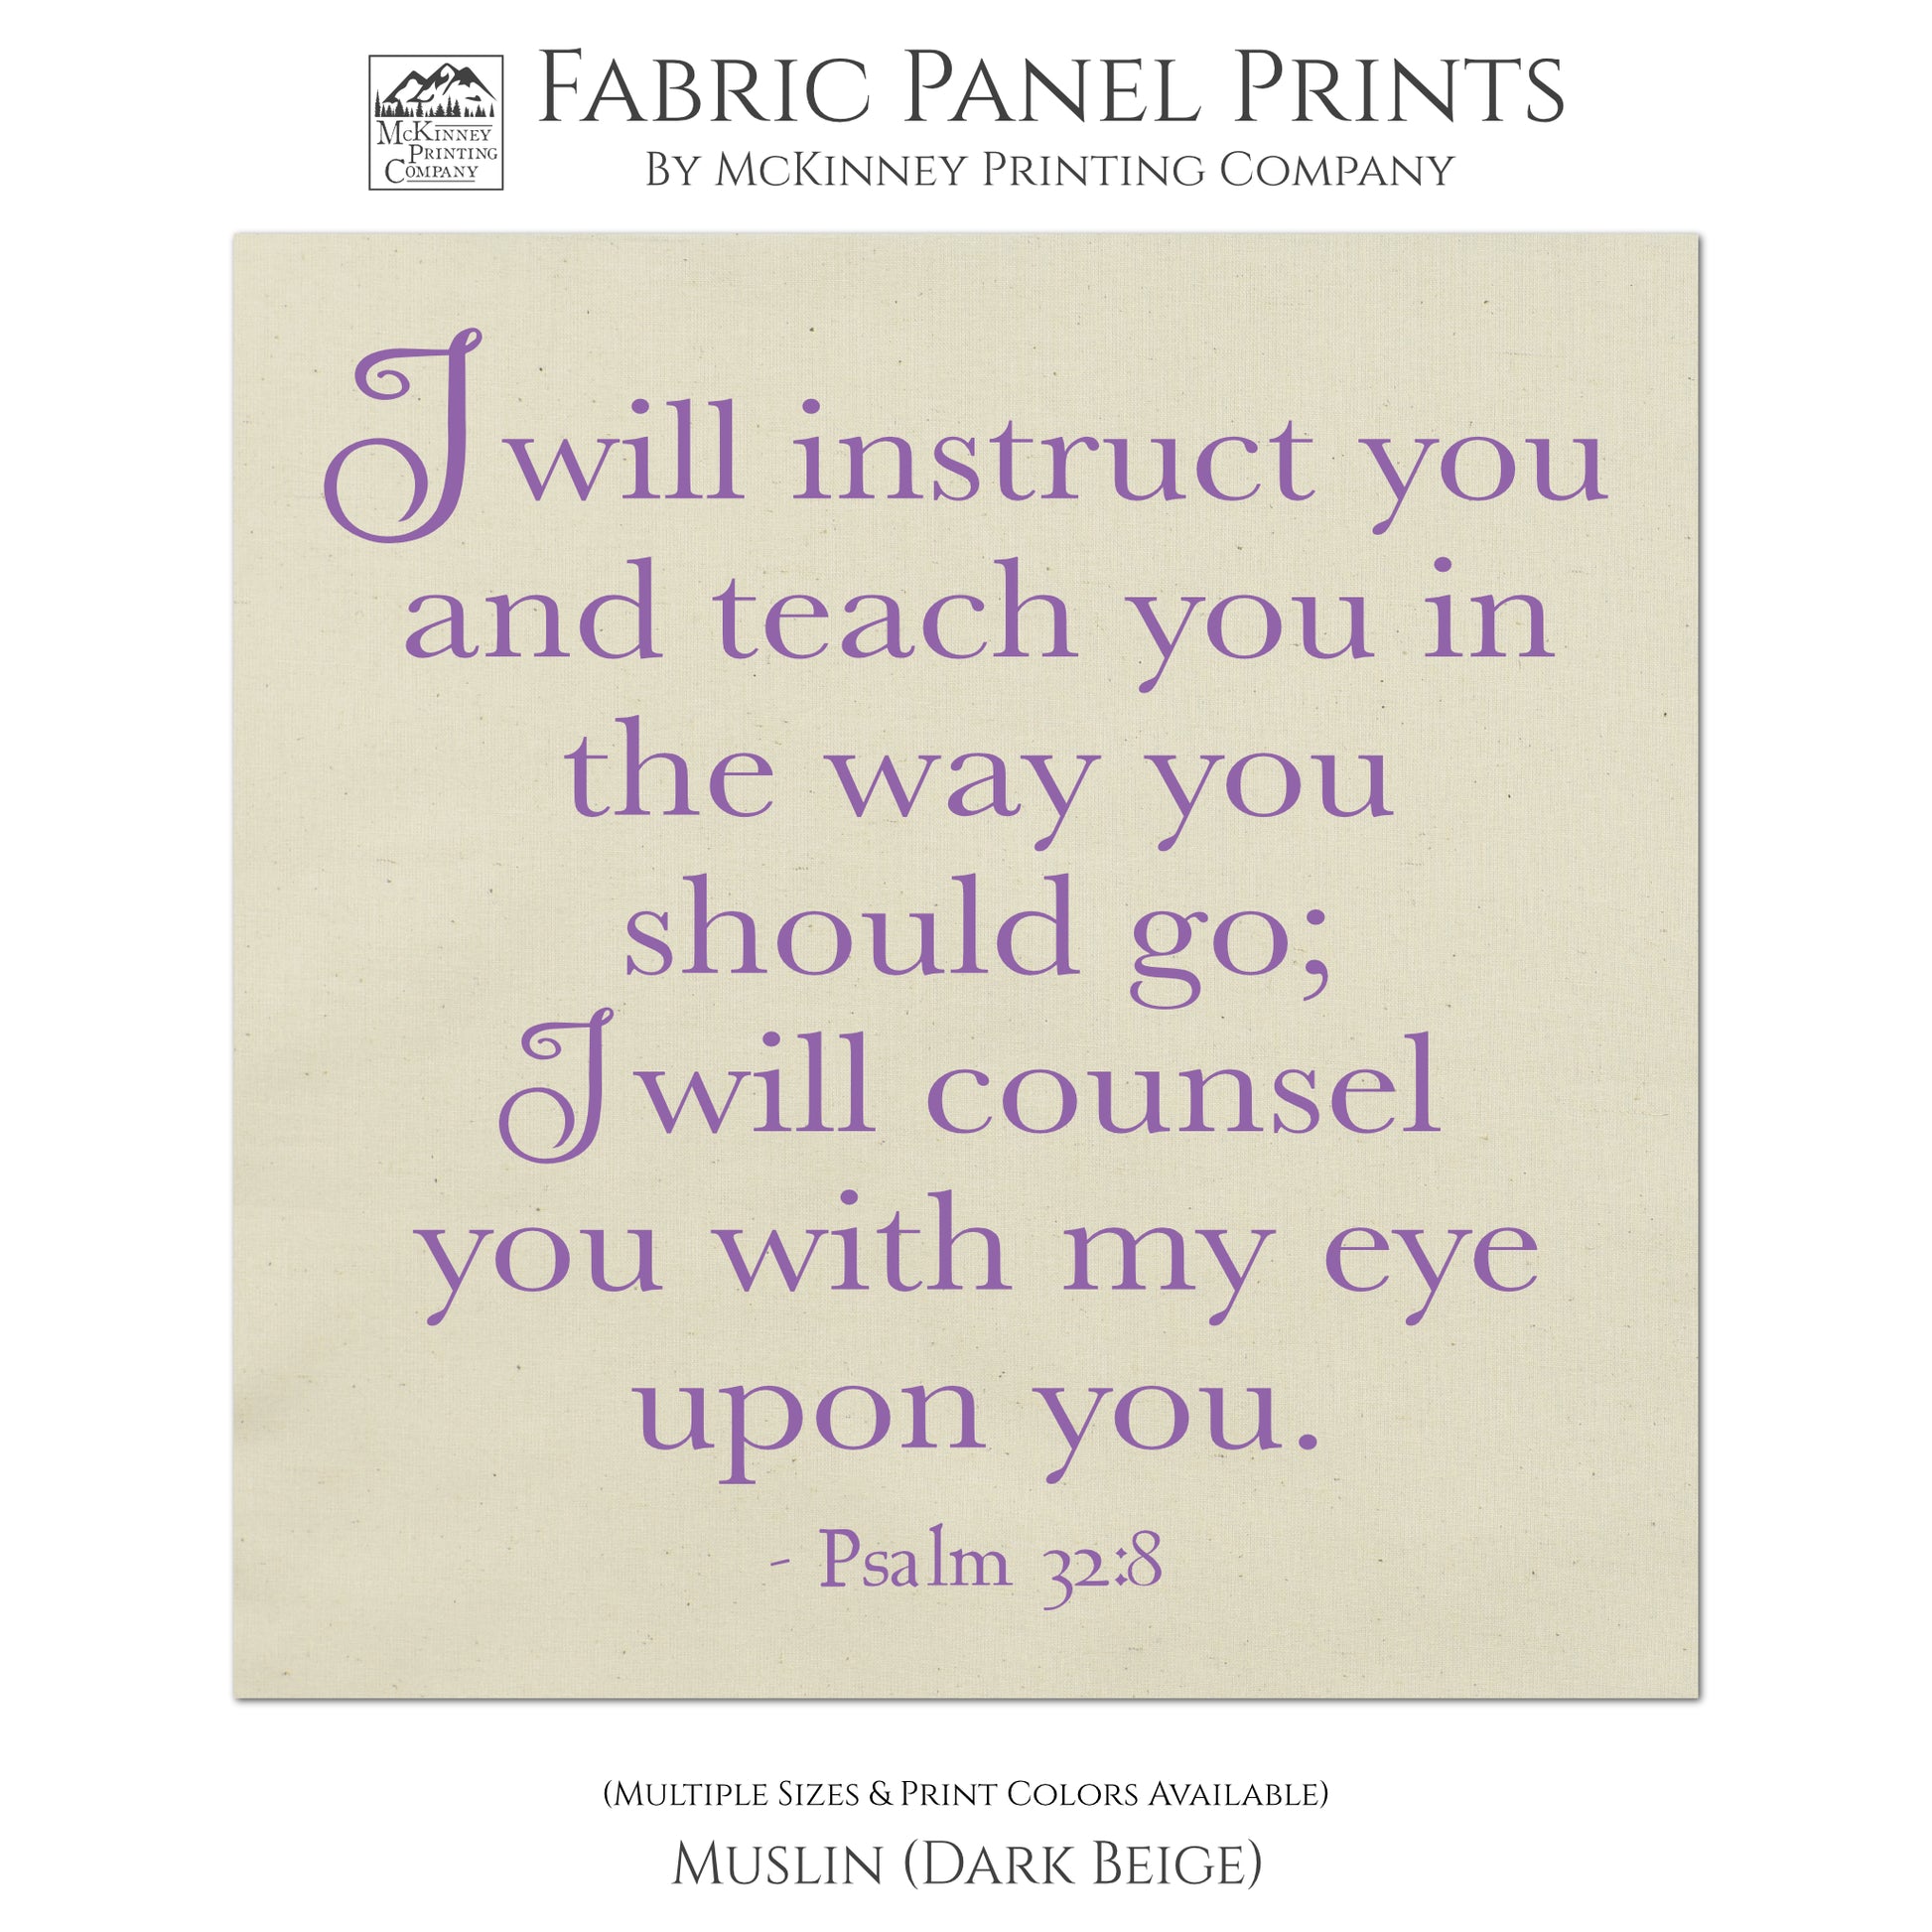 I will instruct you and teach you in the way you should go; I will counsel you with my eye upon you - Psalm 32 8 - Fabric Panel Print, Scripture Fabric, Religious Art, Quilt Block, Large Print Fabric - Muslin